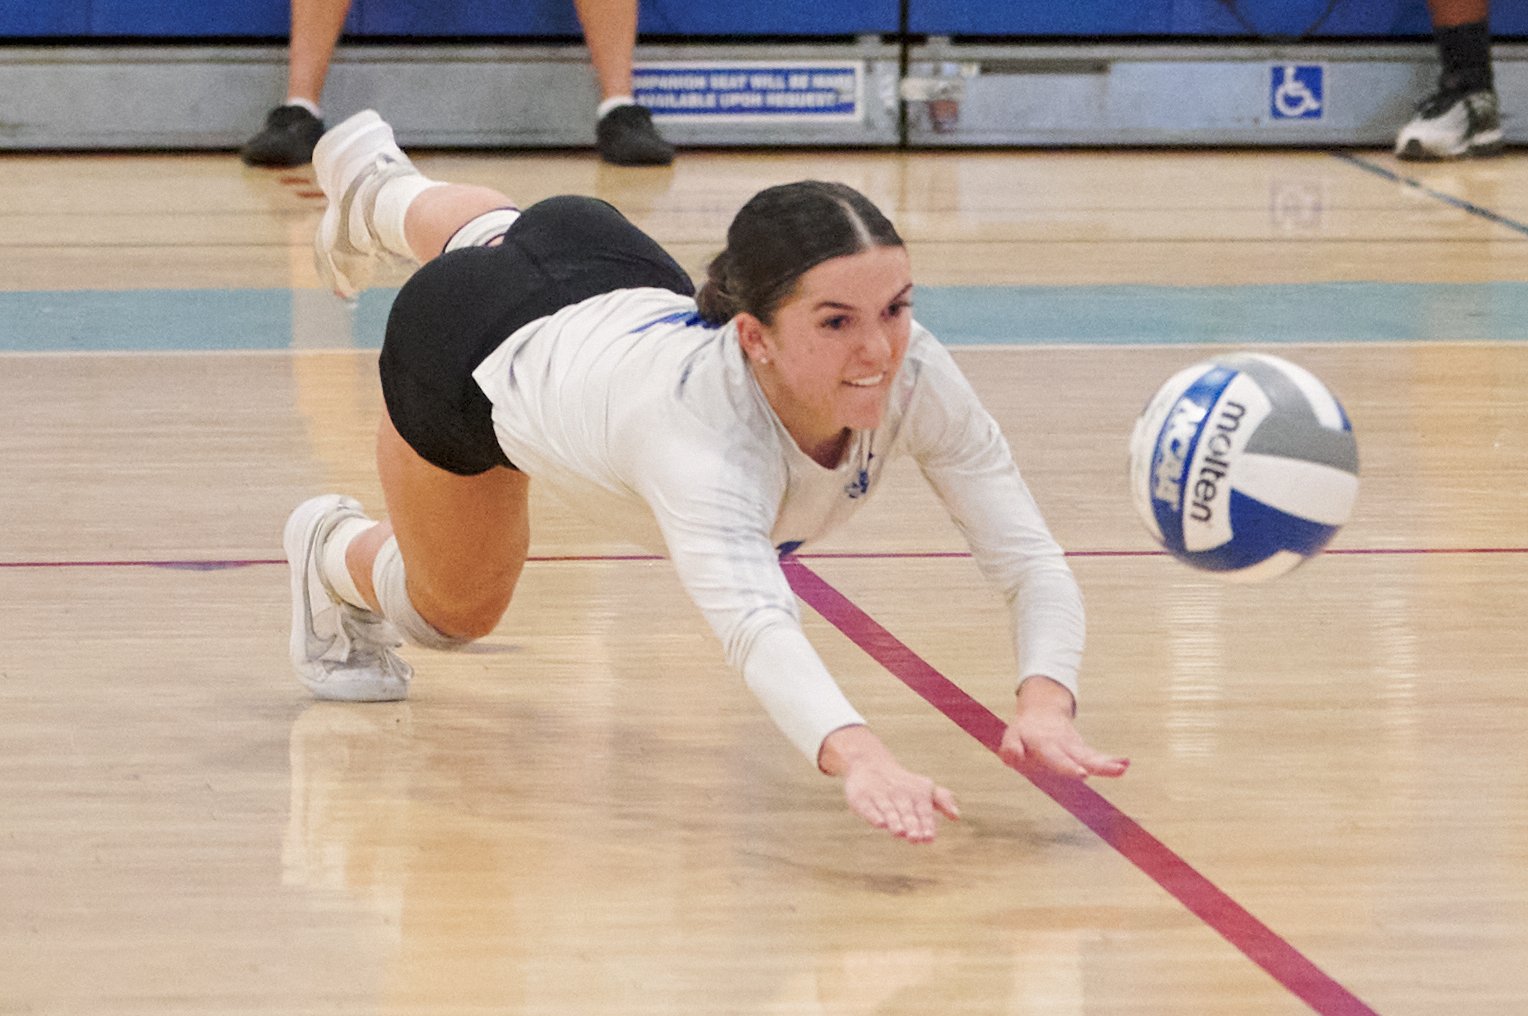  Santa Monica College Corsairs' Halle Anderson dives for the ball during the women's volleyball match against the Bakersfield College Renegades on Wednesday, Sept. 28, 2022, at the Corsair Gym in Santa Monica, Calif. The Corsairs won 3-2. (Nicholas M